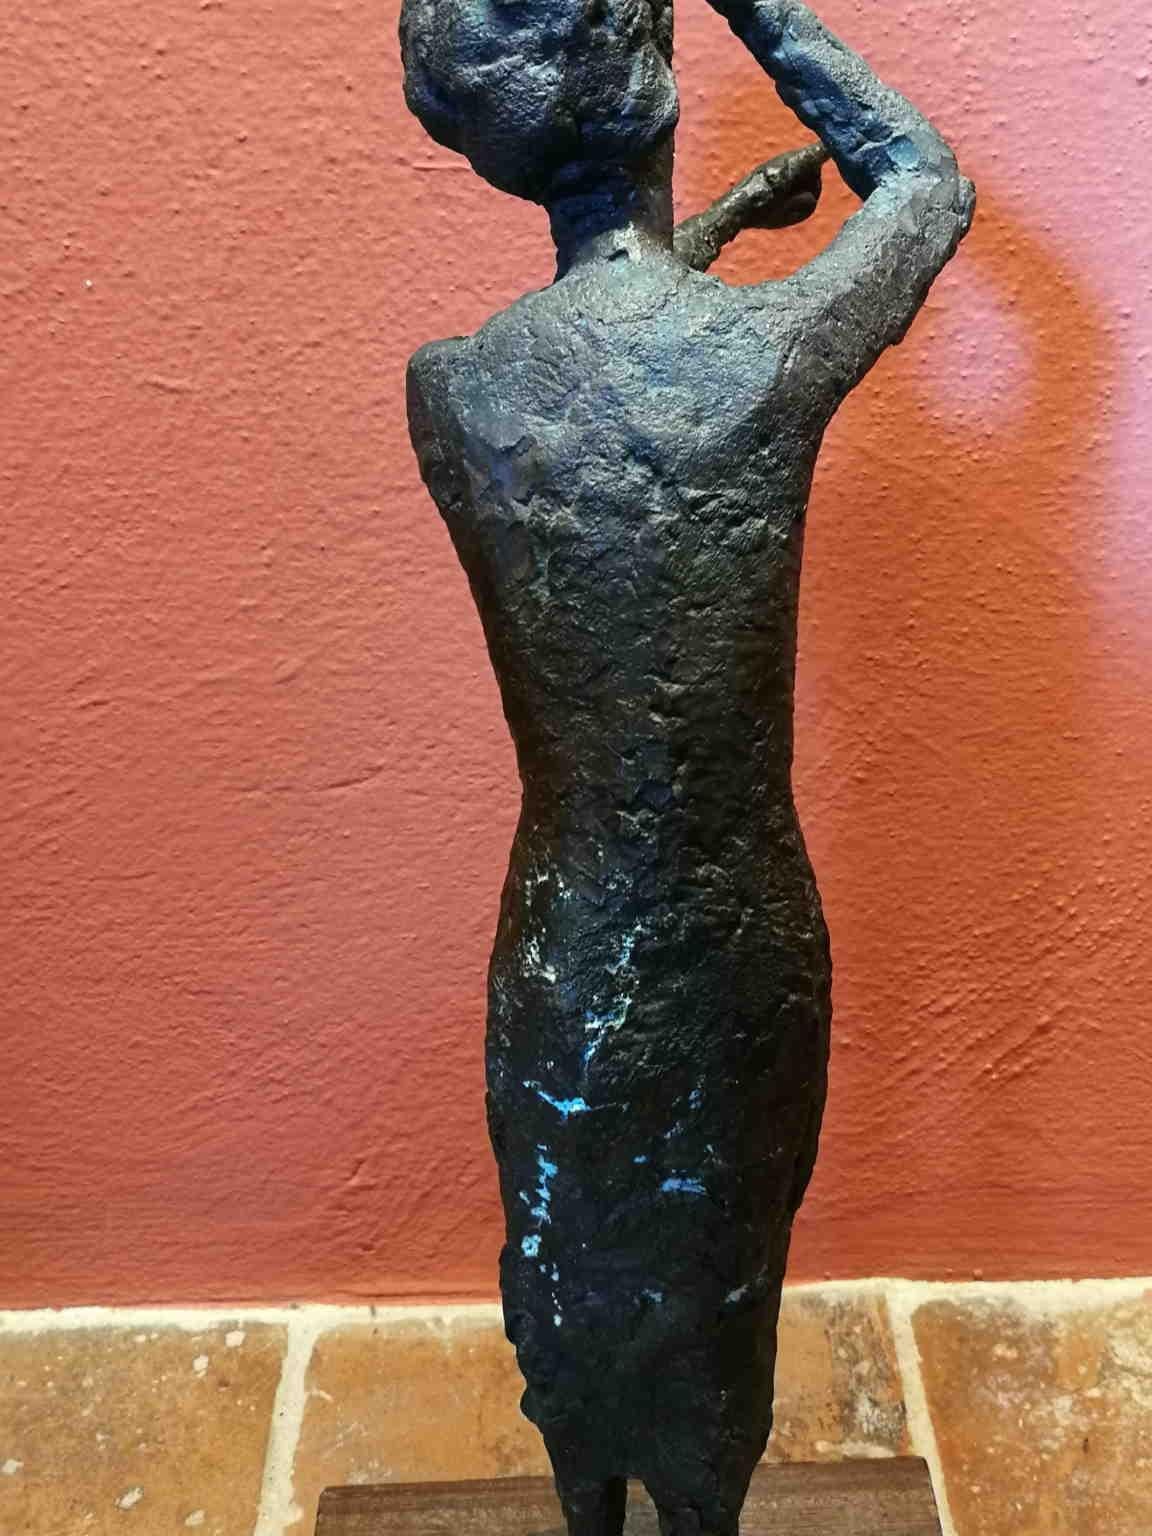 Tuscan Florentine Figurative Abstract Female Bronze Statue 20th century  For Sale 4